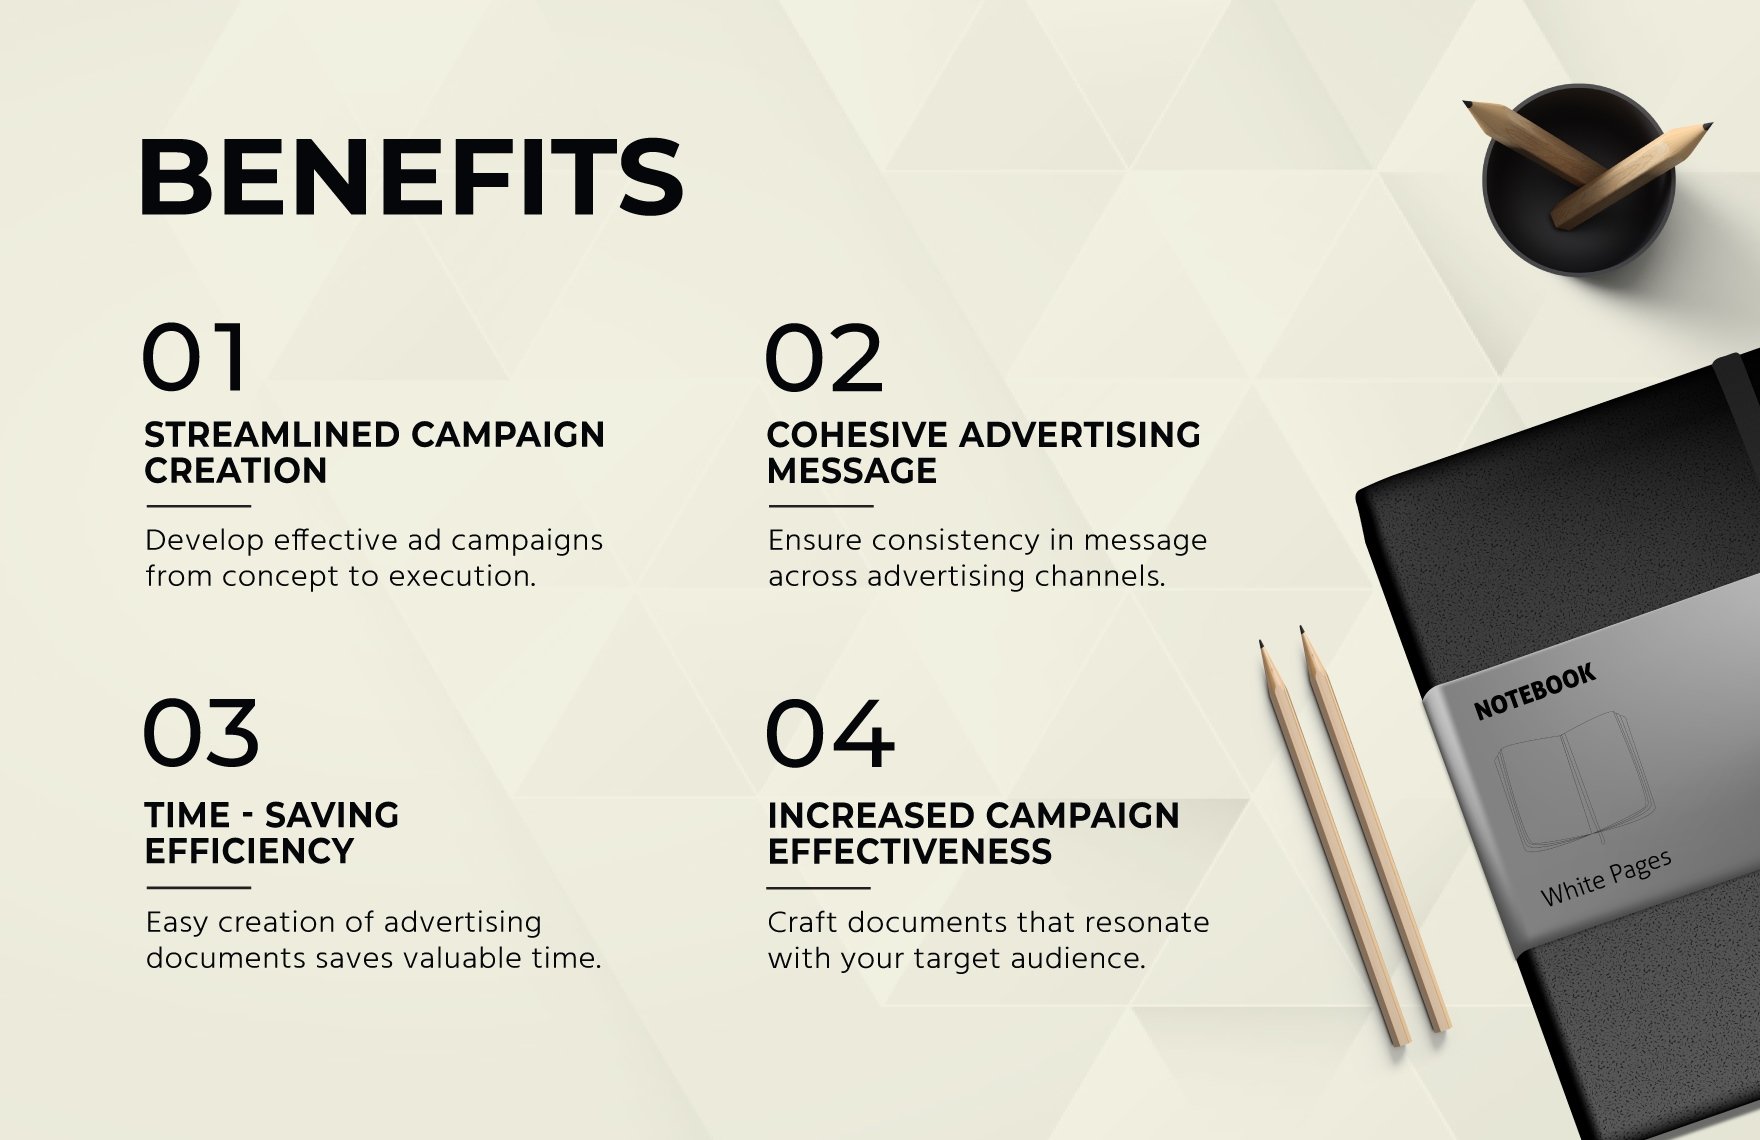 Comparative Advertising Compliance Checklist Template